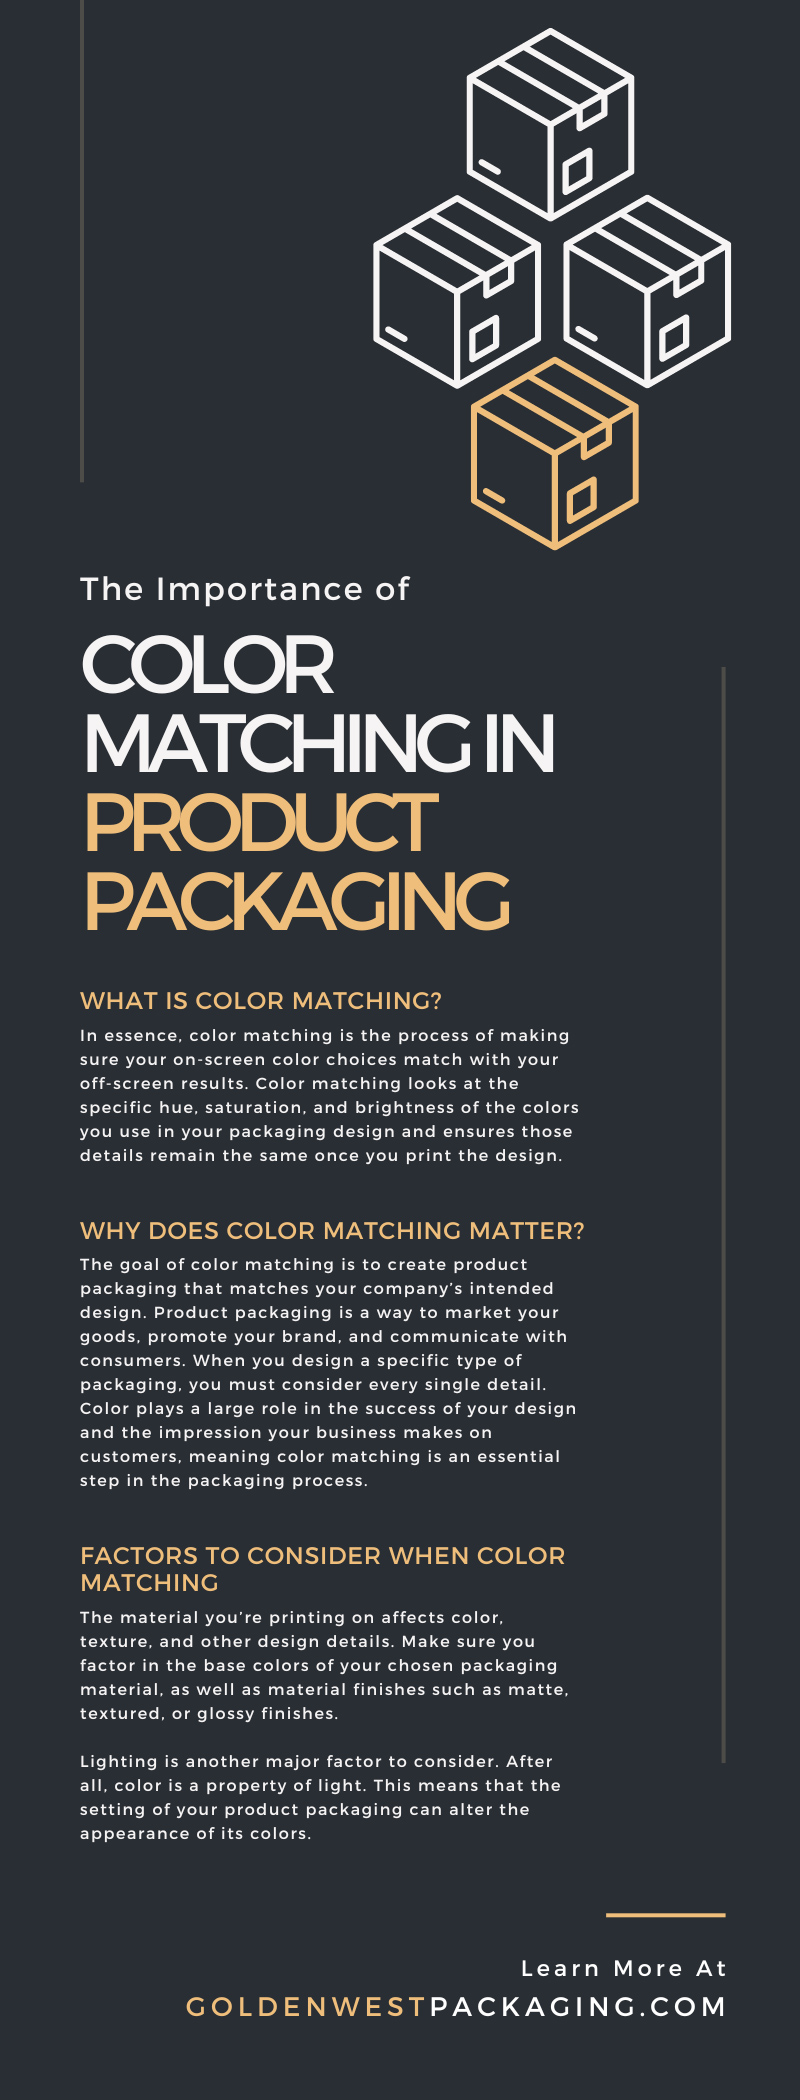 The Importance of Color Matching in Product Packaging